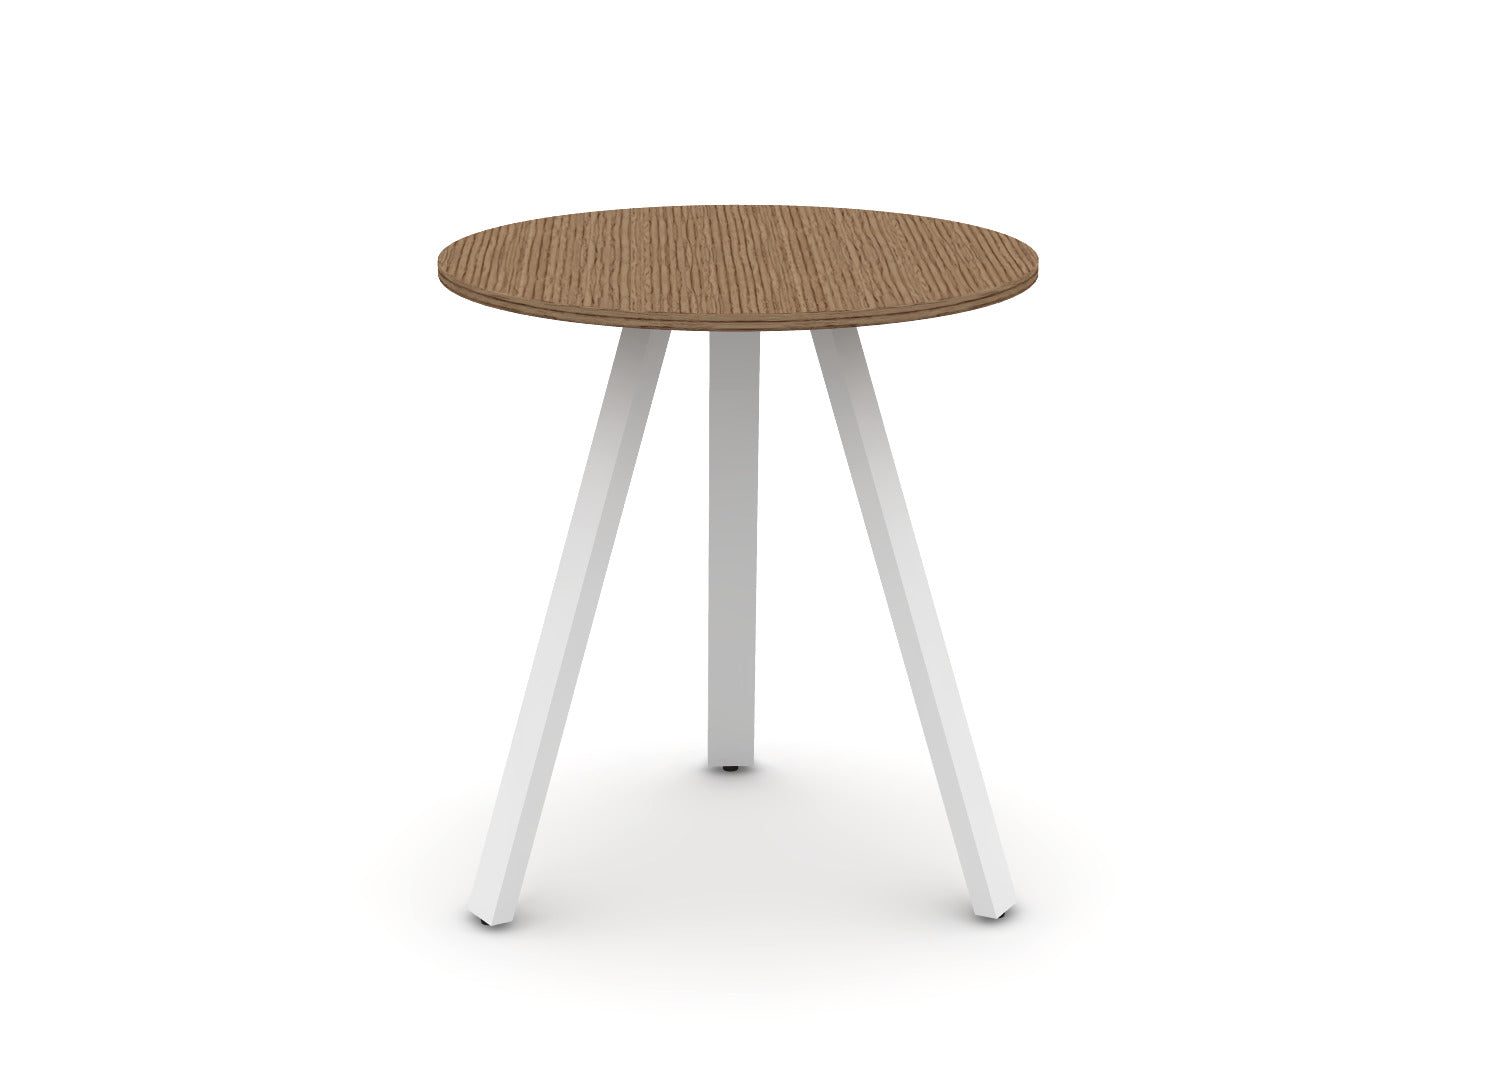 Round Angled-Leg Table – Standing Height